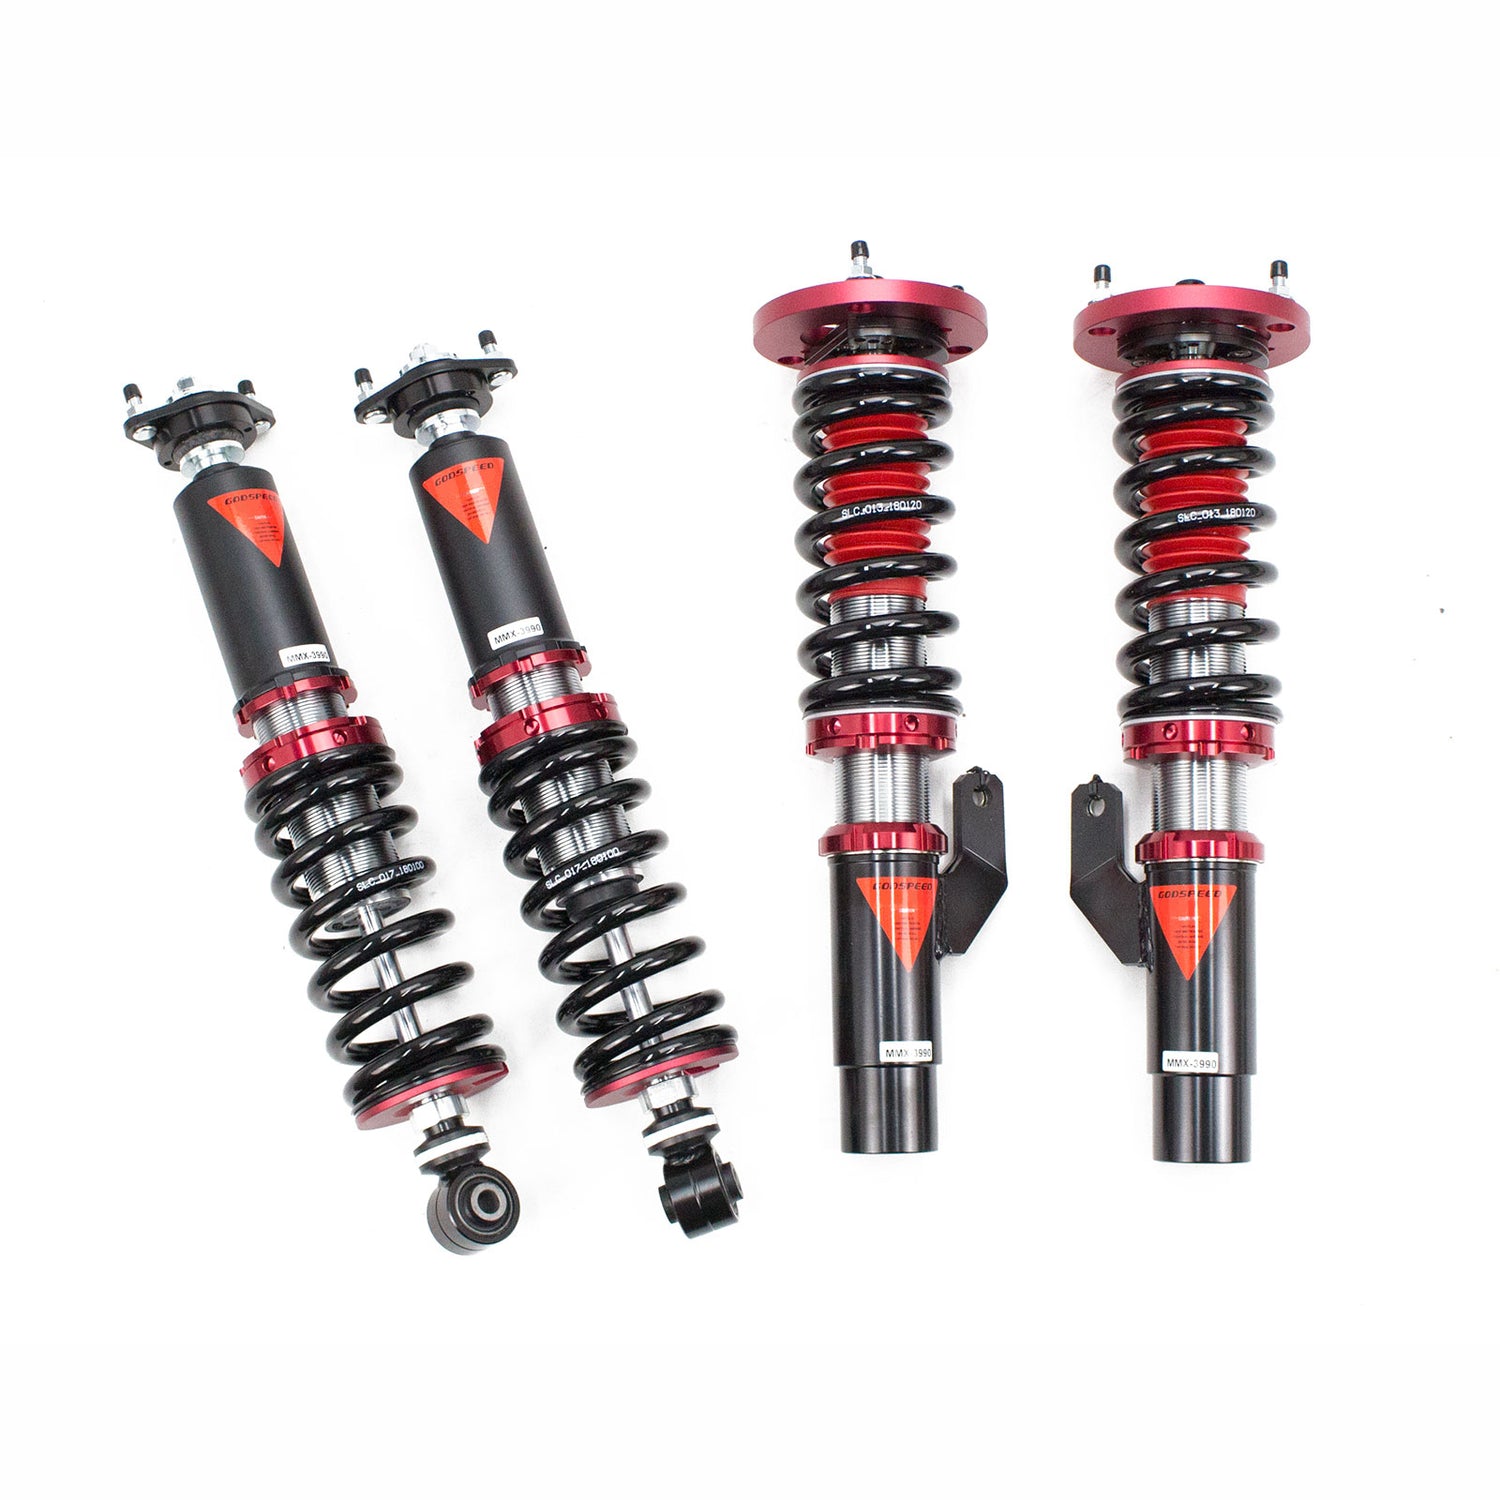 MMX3990 MAXX Coilovers Lowering Kit, Fully Adjustable, Ride Height, 40 Clicks Rebound Settings